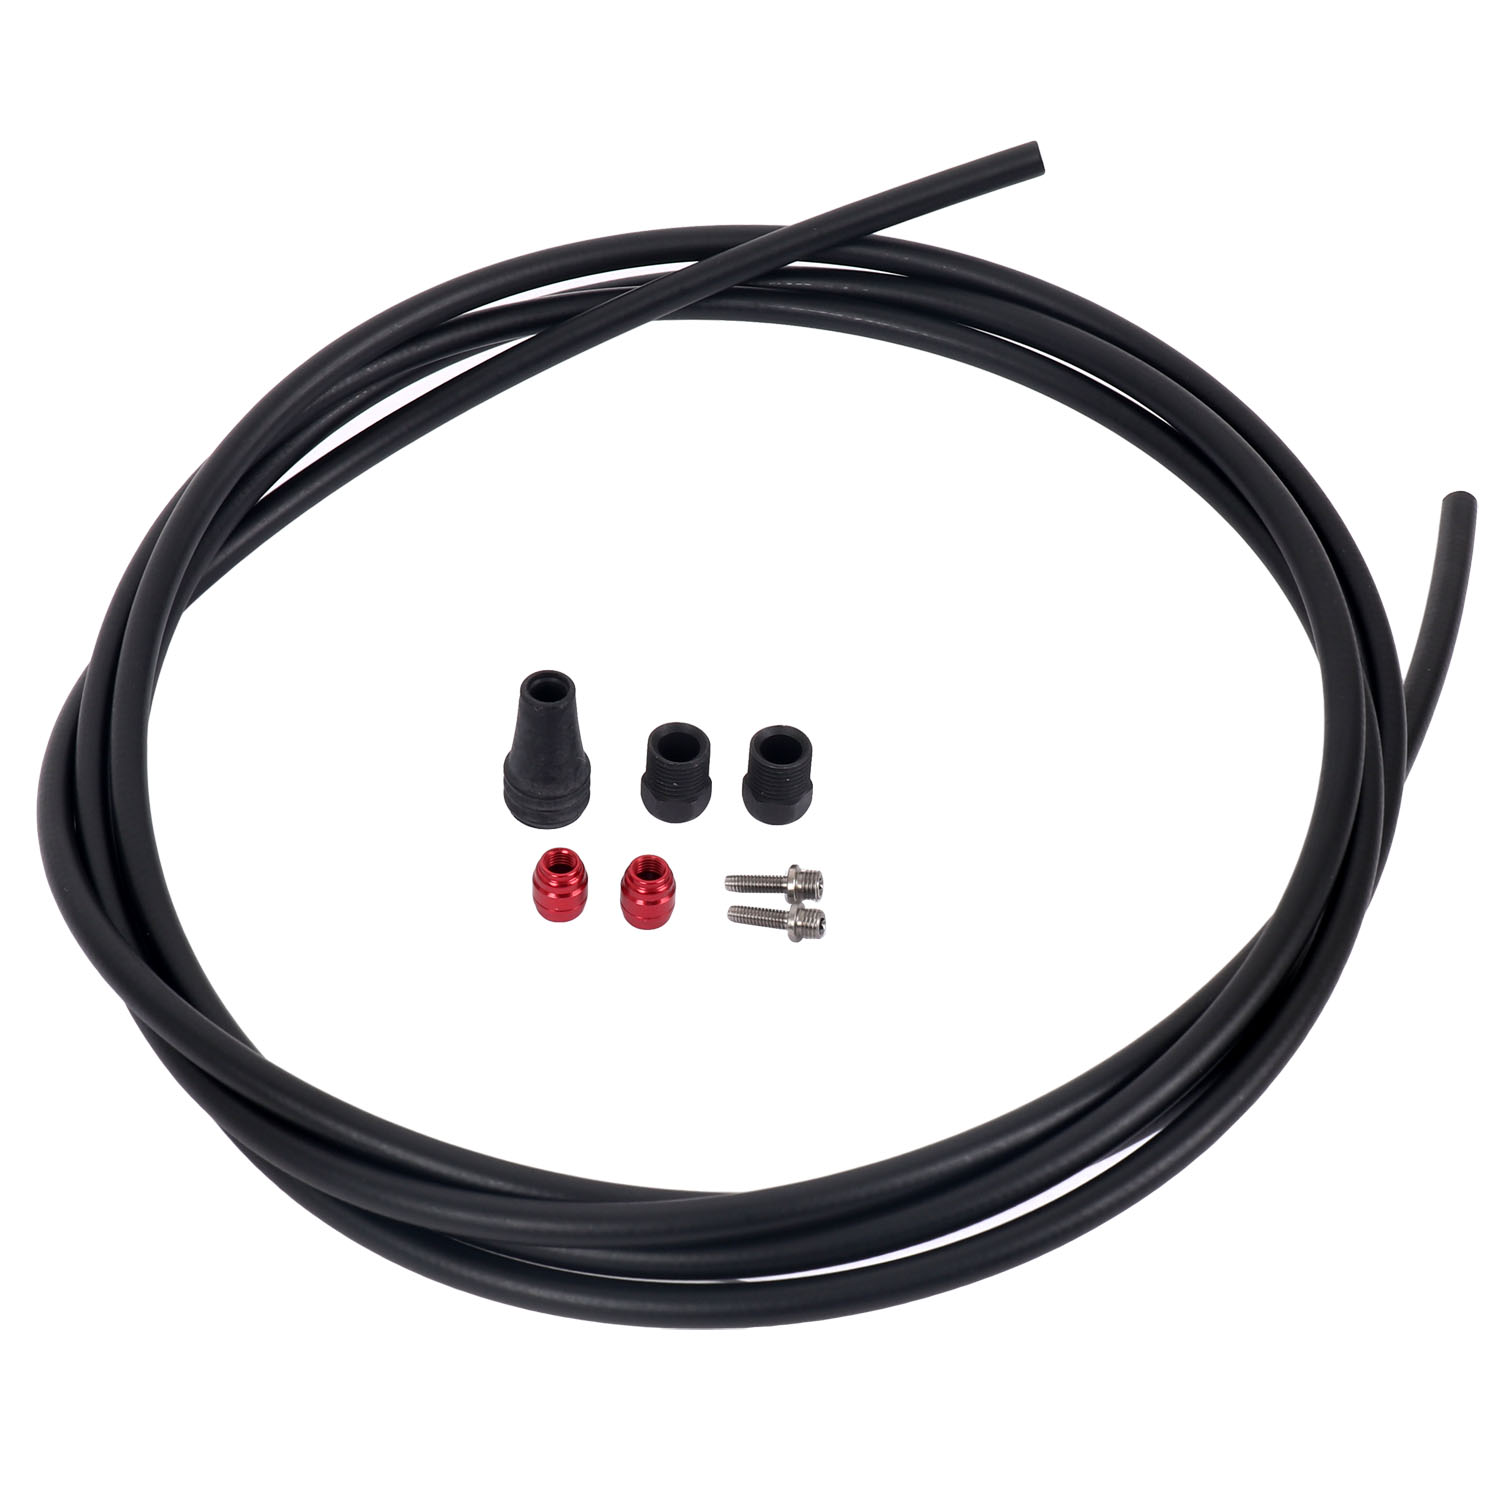 Picture of SRAM Hydraulic Hose Kit for Road Disc Brakes - 2000mm - black